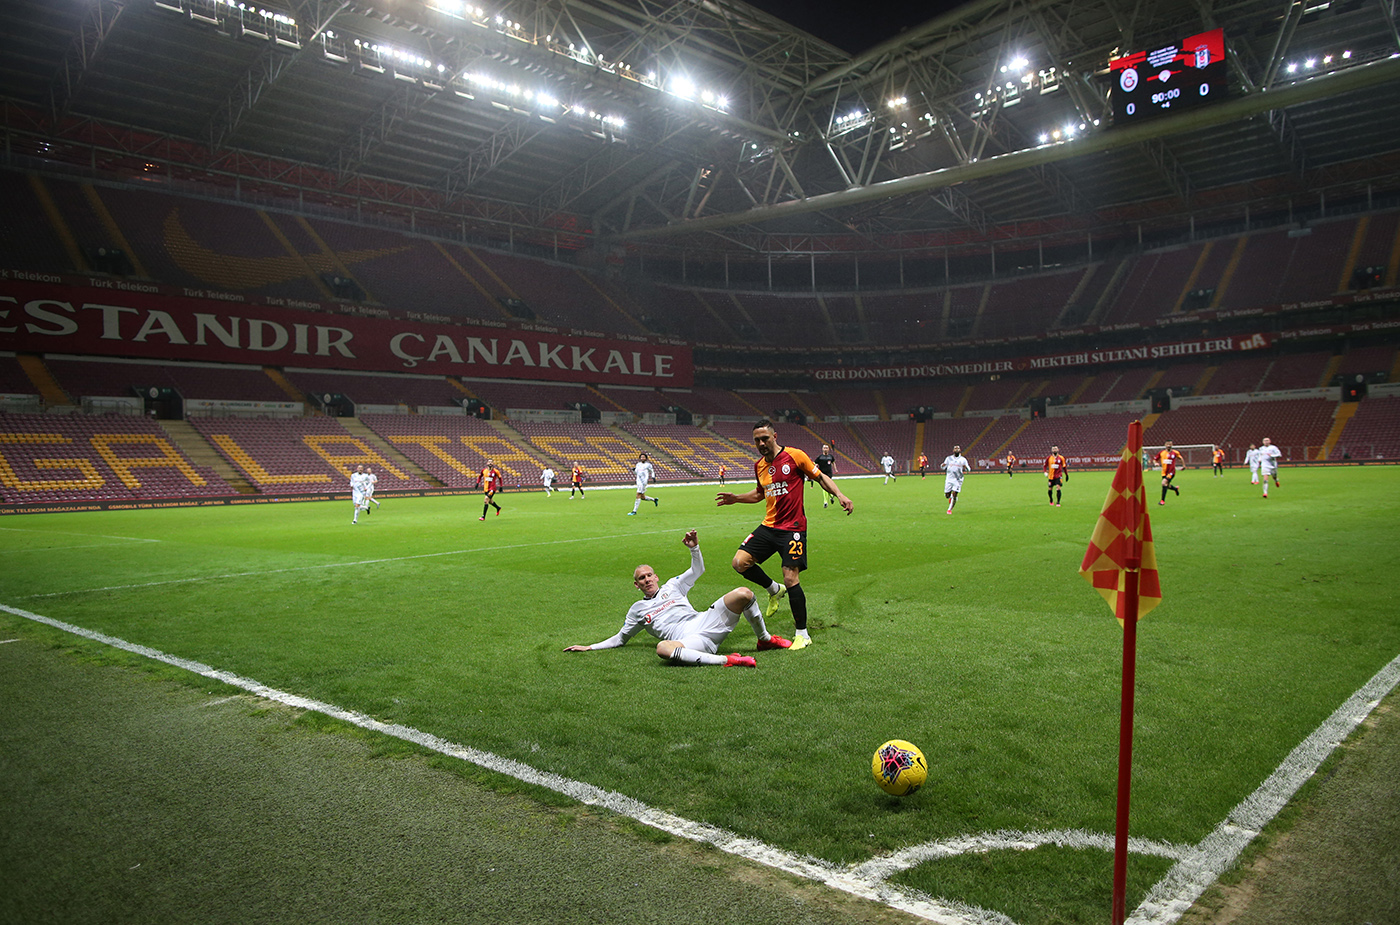 Galatasaray vs Besiktas Turkish Super League derby match played without spectators over the COVID-19 coronavirus threat in Istanbul, Turkey, 15 March 2020.